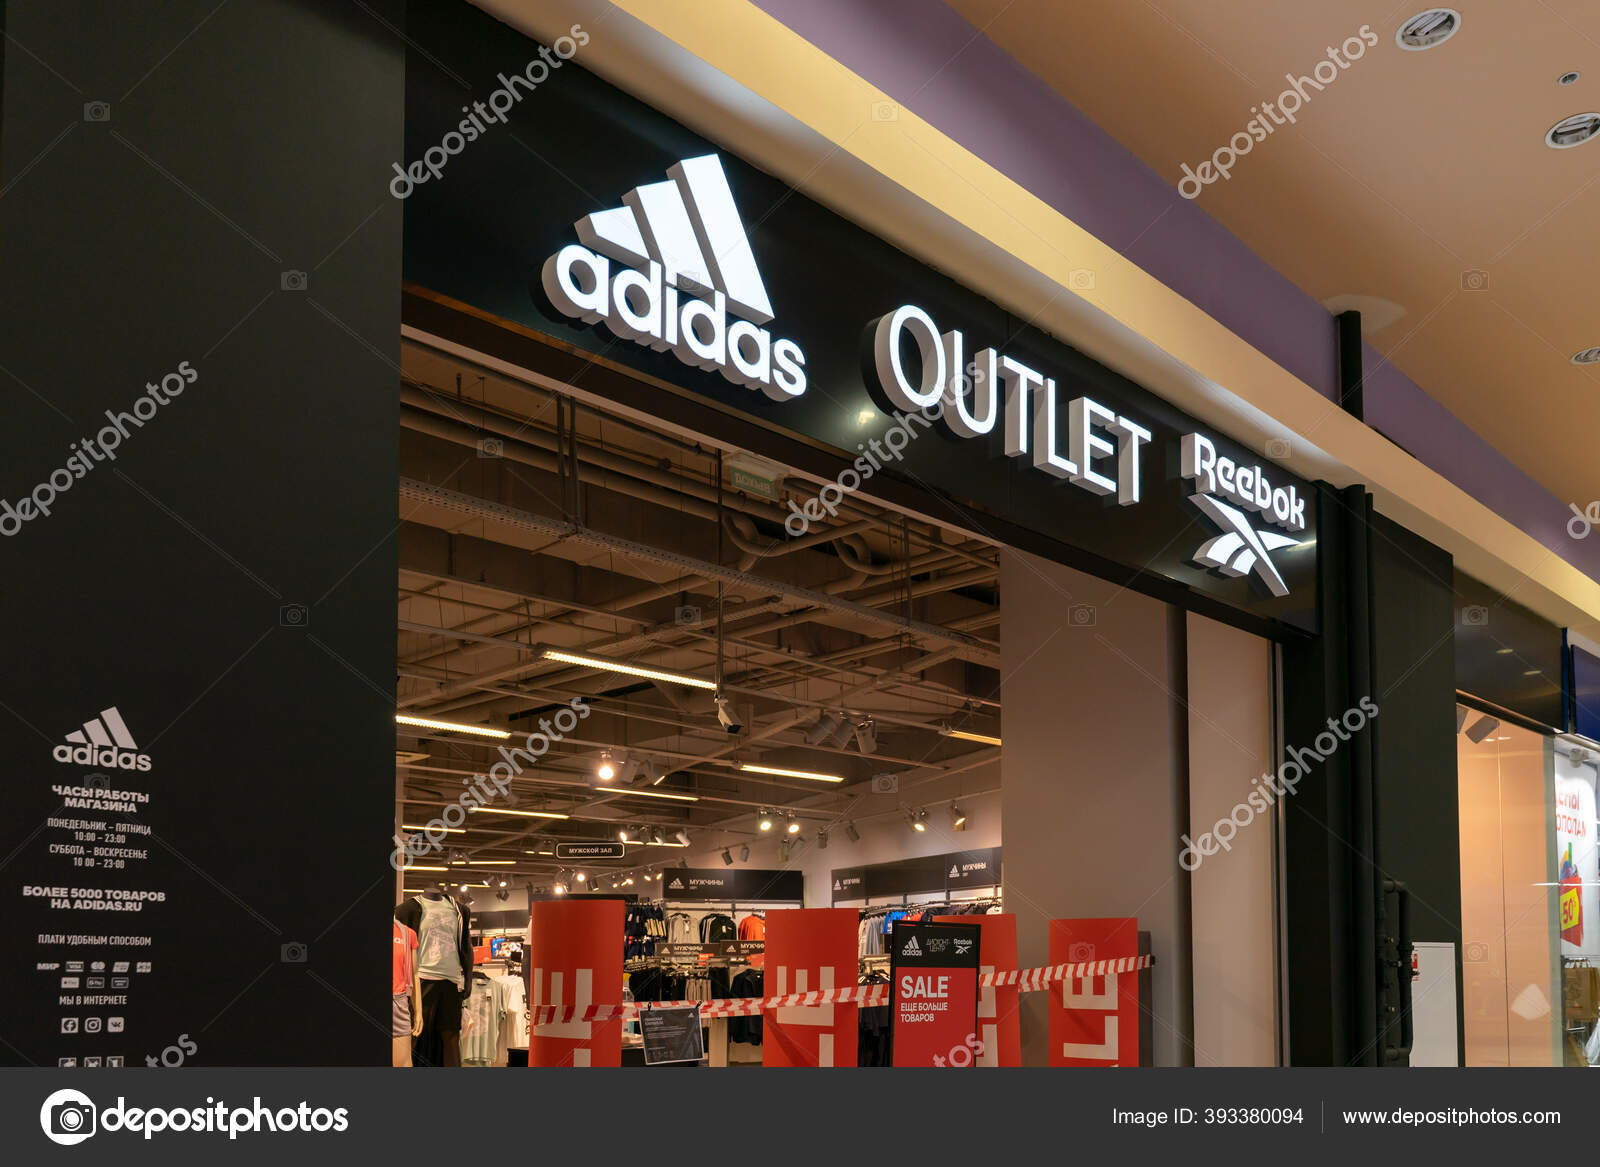 adidas and reebok outlet